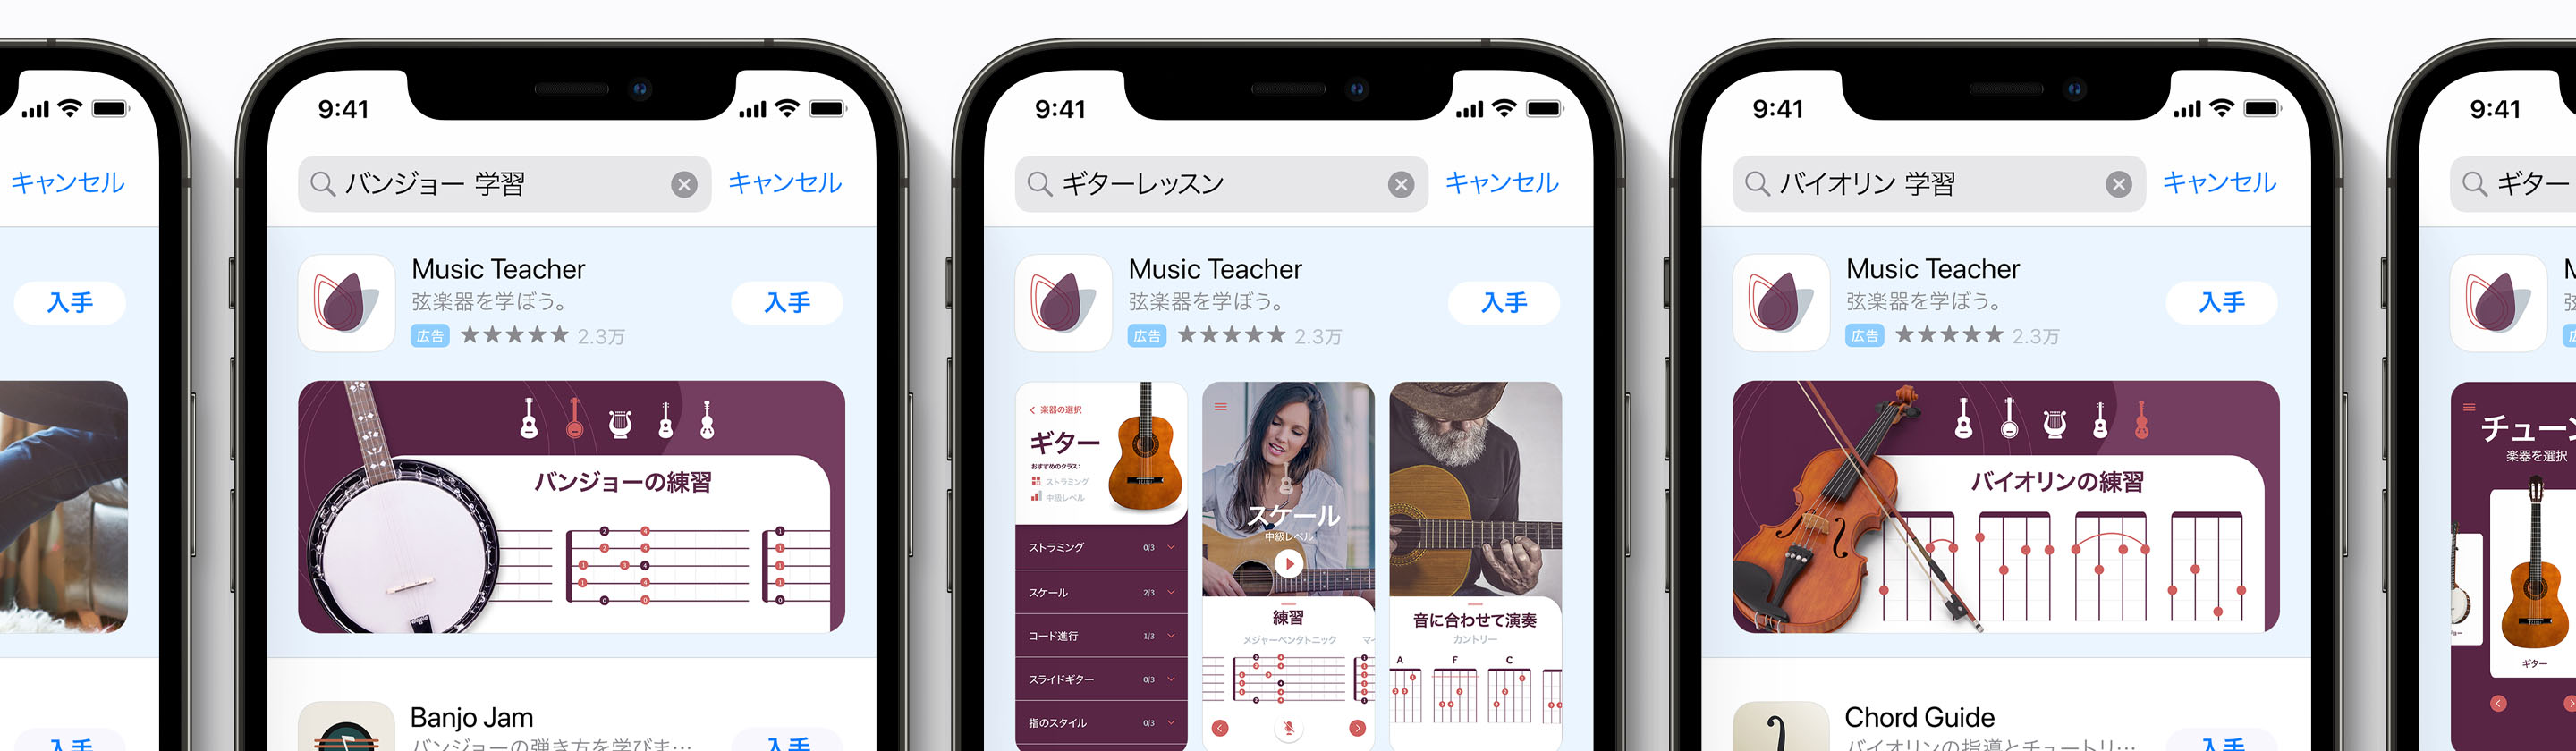 Search resultsキャンペーンの広告の例。